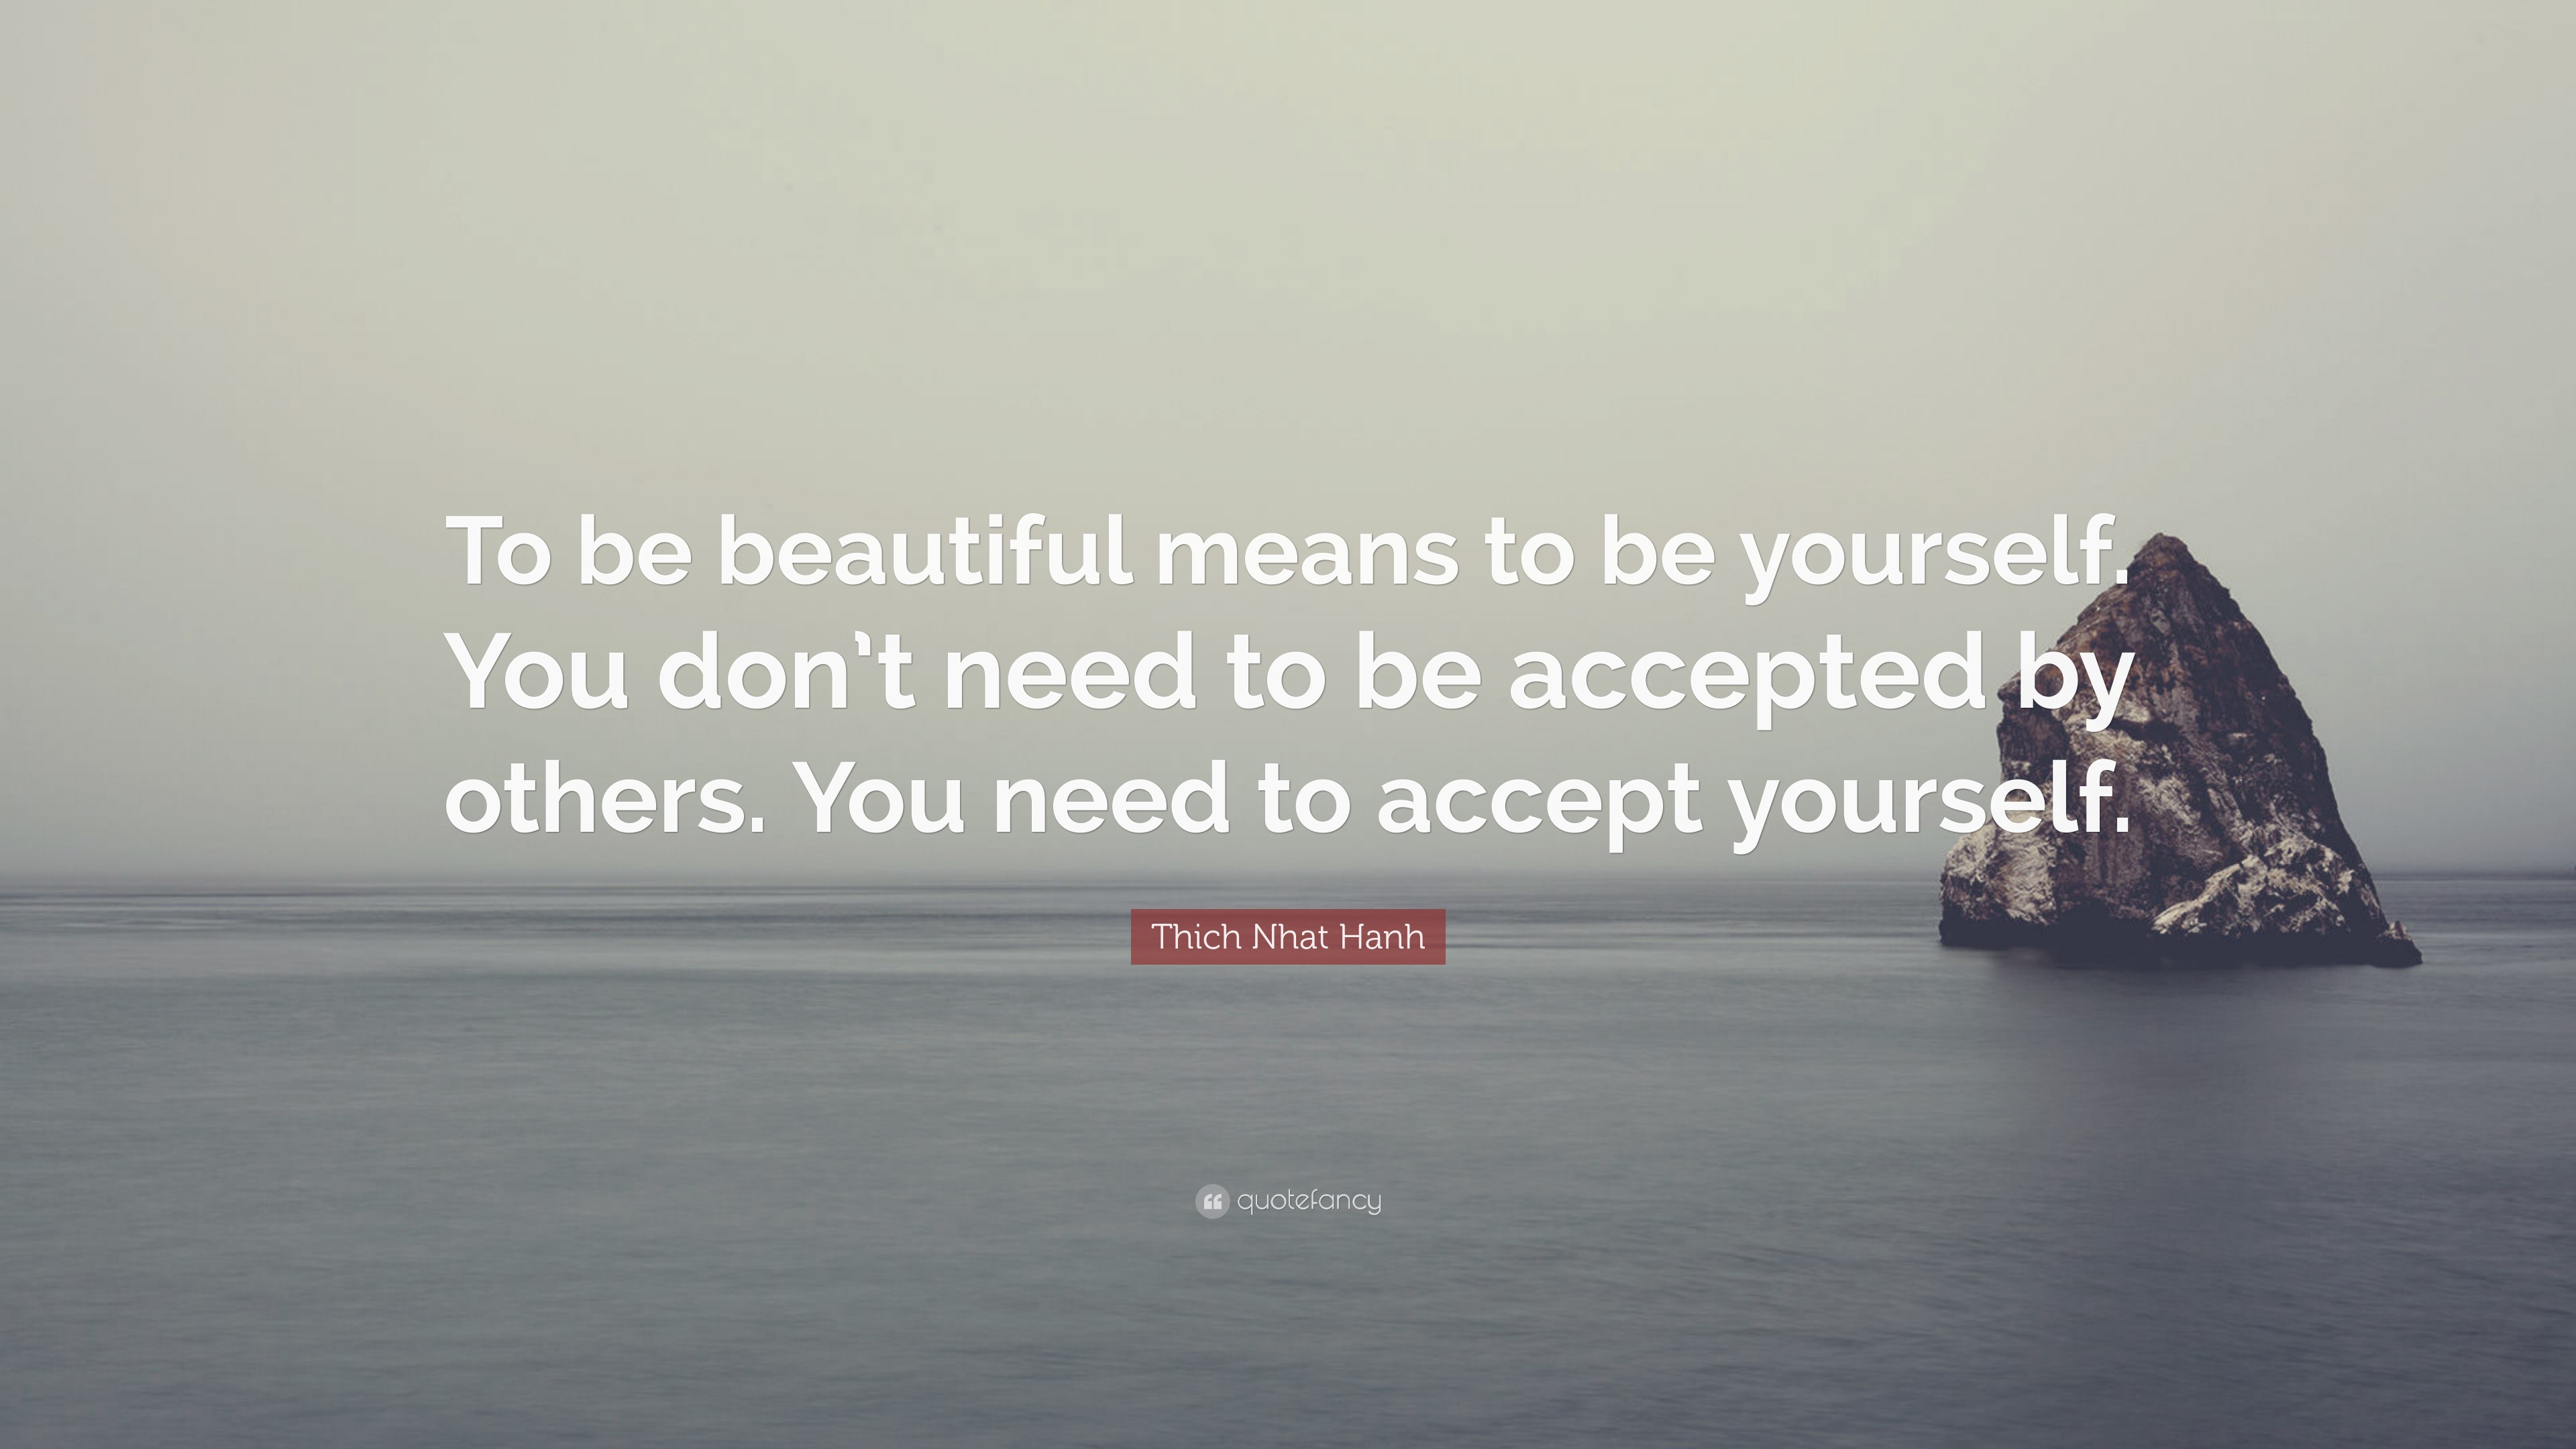 Thich Nhat Hanh Quote: “To be beautiful means to be yourself. You don’t ...